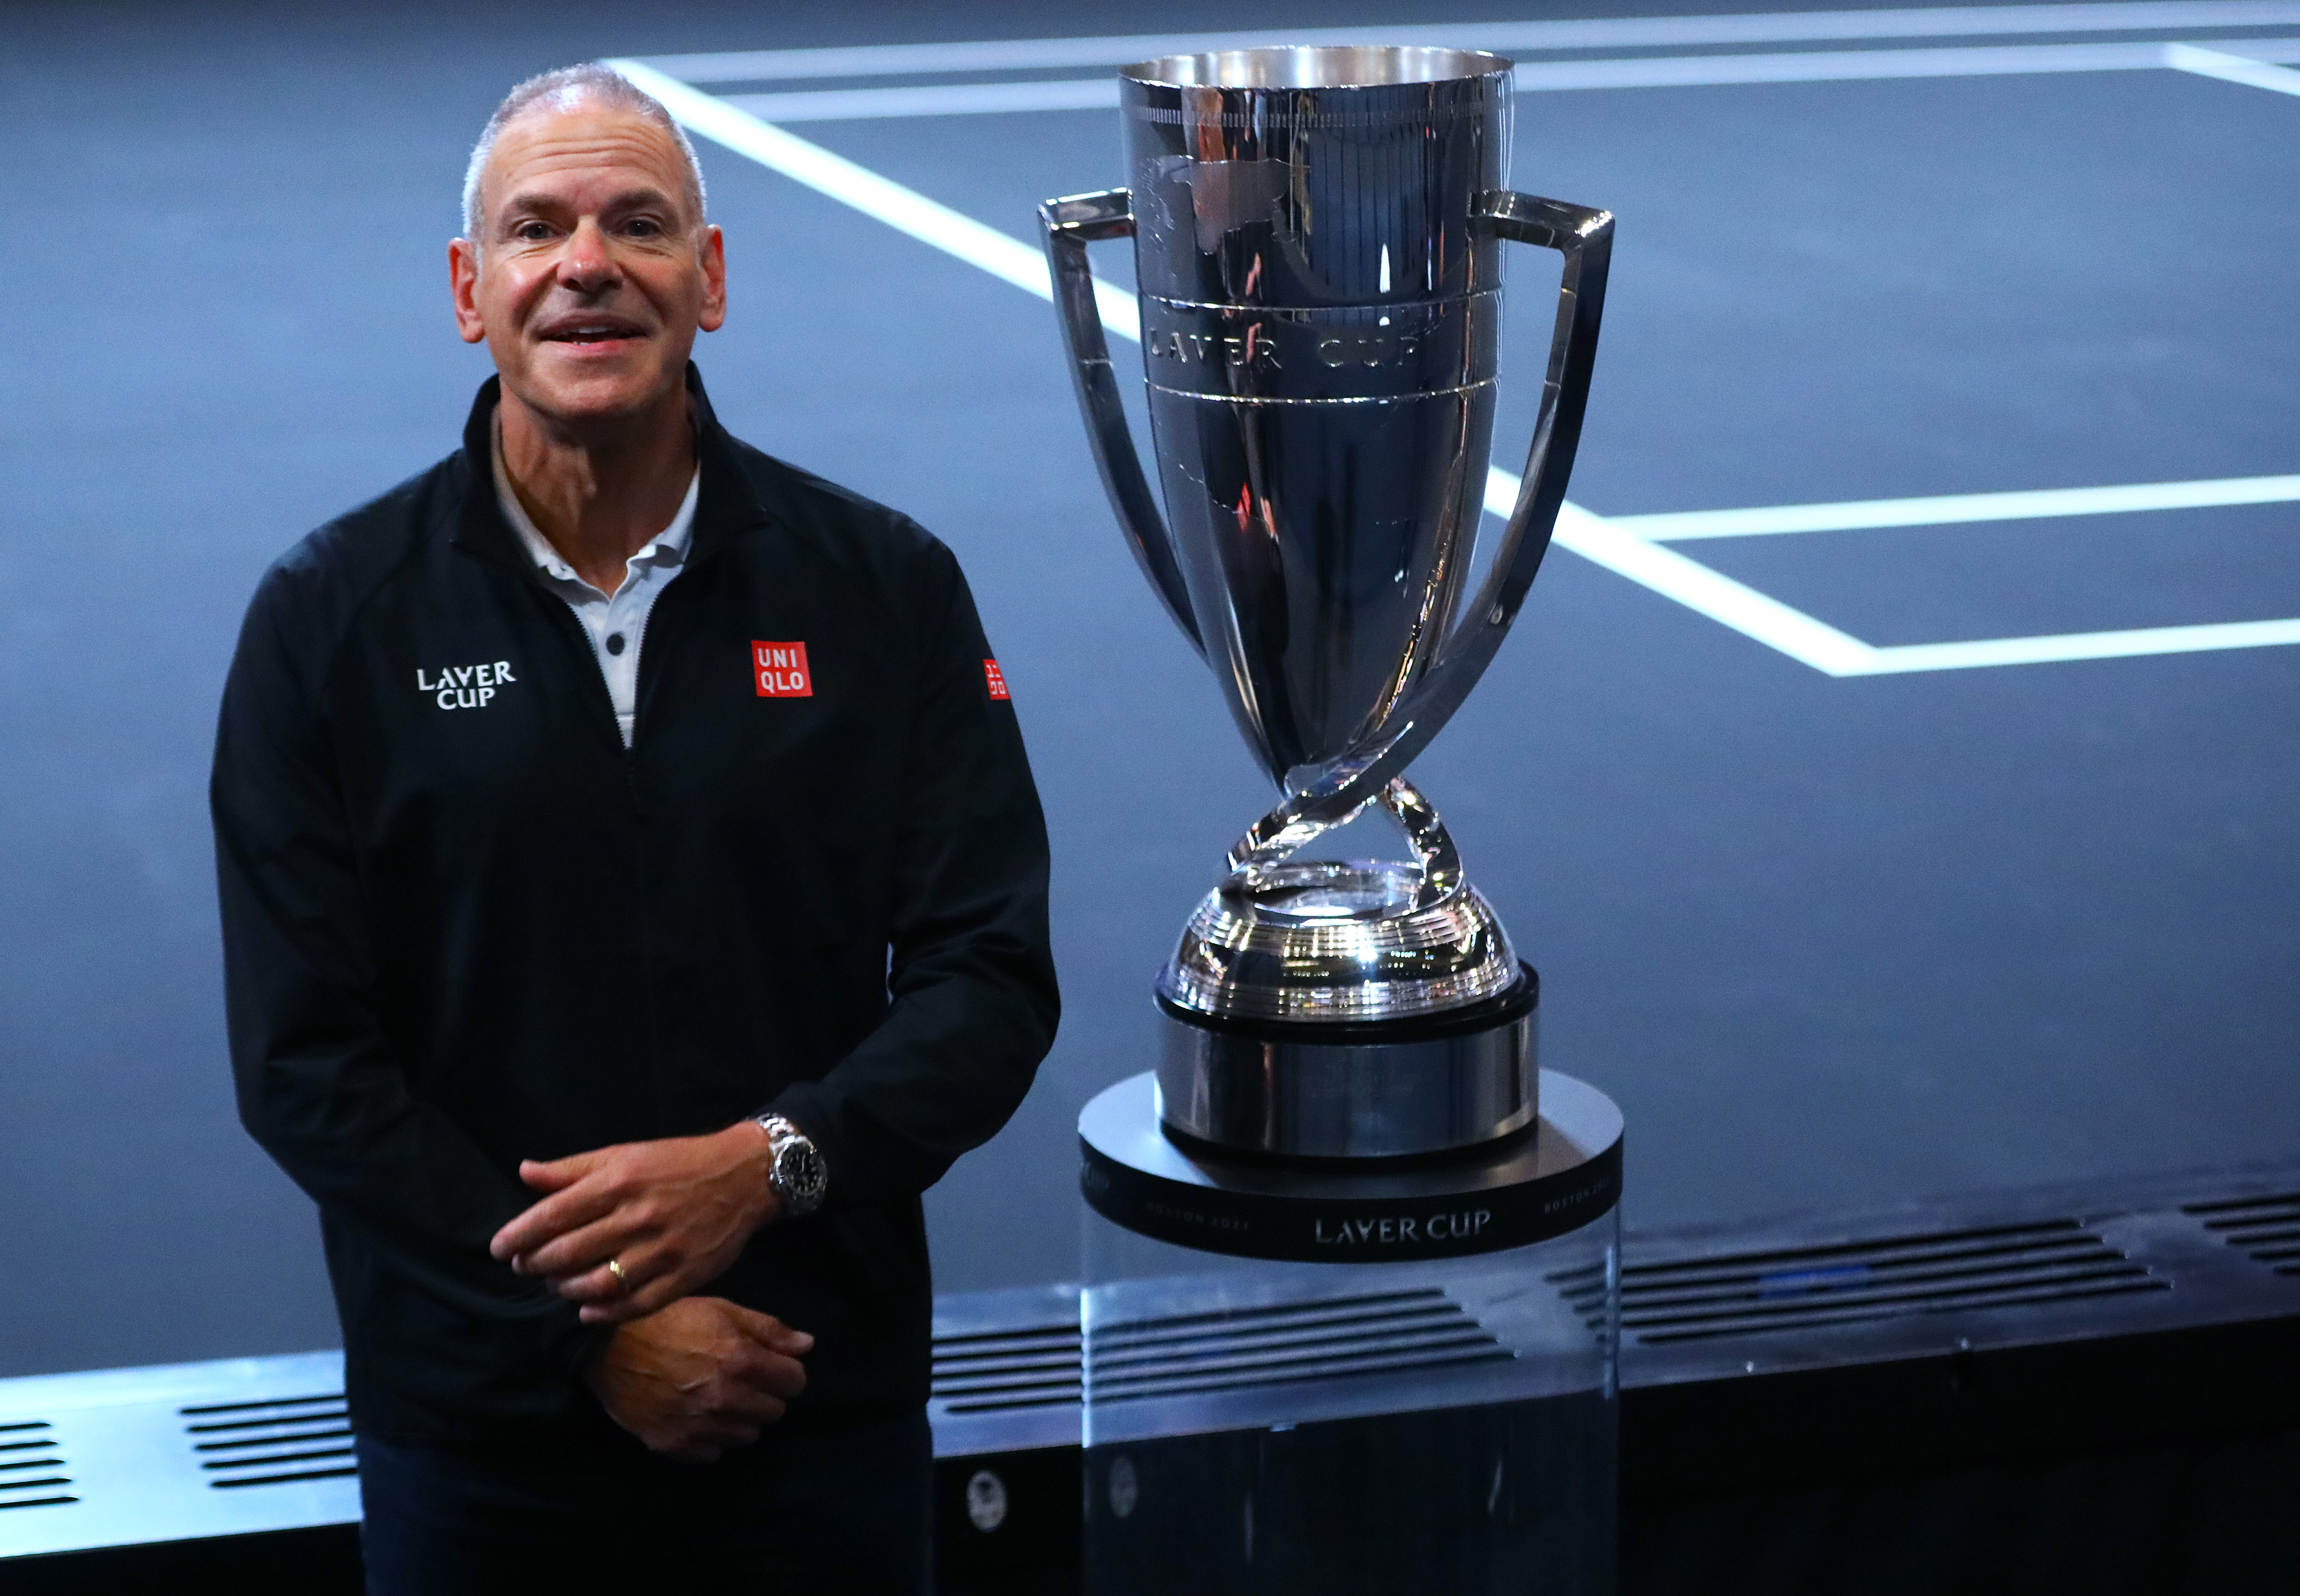 After a year delay, the Laver Cup is ready to serve up world-class tennis at TD Garden